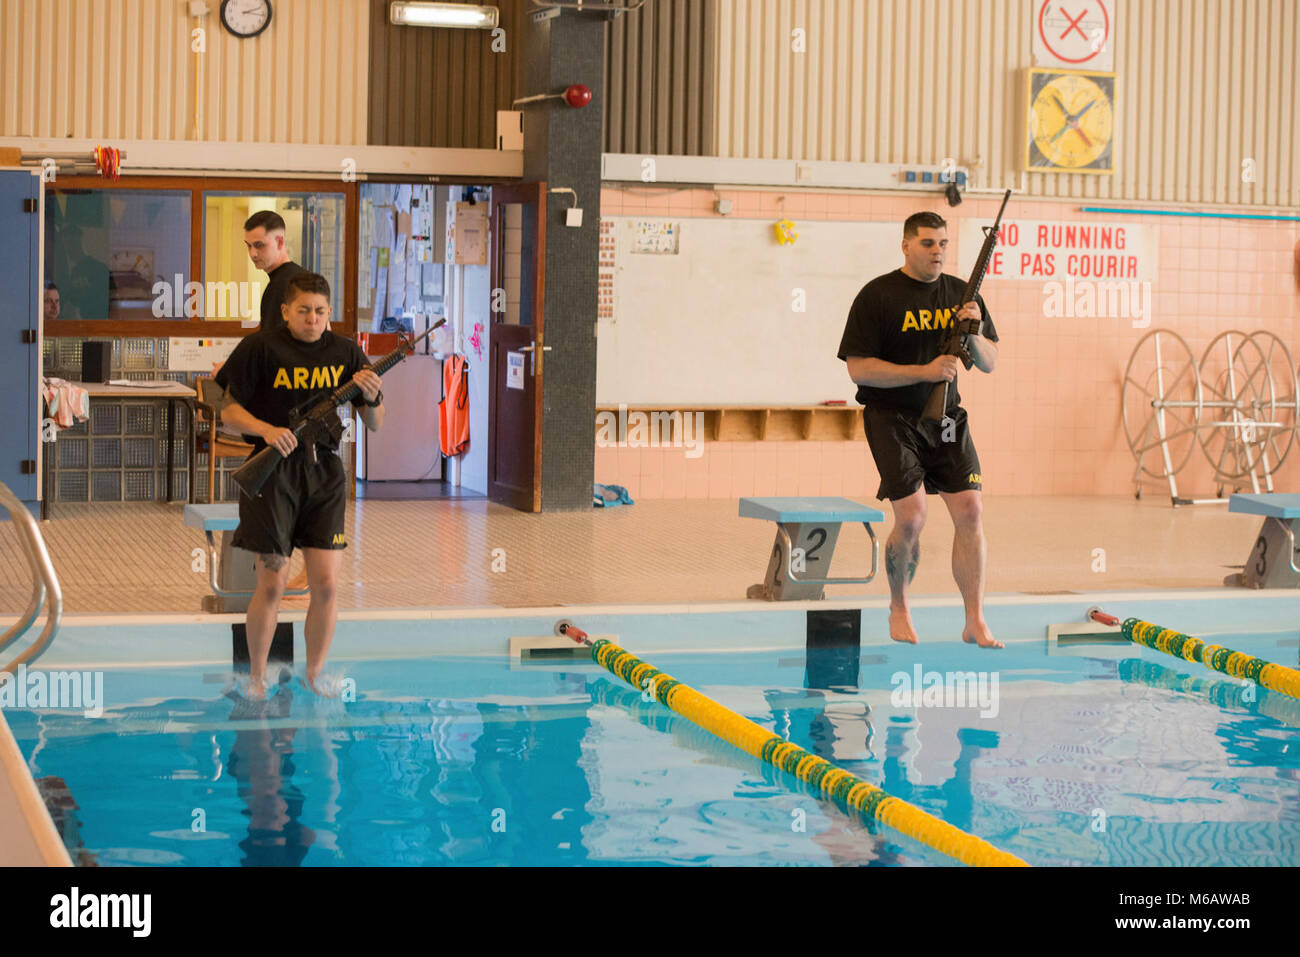 U.S. Army Spc. Jacqueline Delgado (left), assigned to the Chièvres Military Police at U.S. Army Garrison Benelux, and Spc. Jesse Watkins (right), assigned to the Schinnen Provost Marshal Office at USAG Benelux, compete for the garrison’s Best Warrior Competition in the swimming pool at the Supreme Headquarters Allied Powers Europe, Belgium, Feb. 21, 2018. (U.S. Army Stock Photo